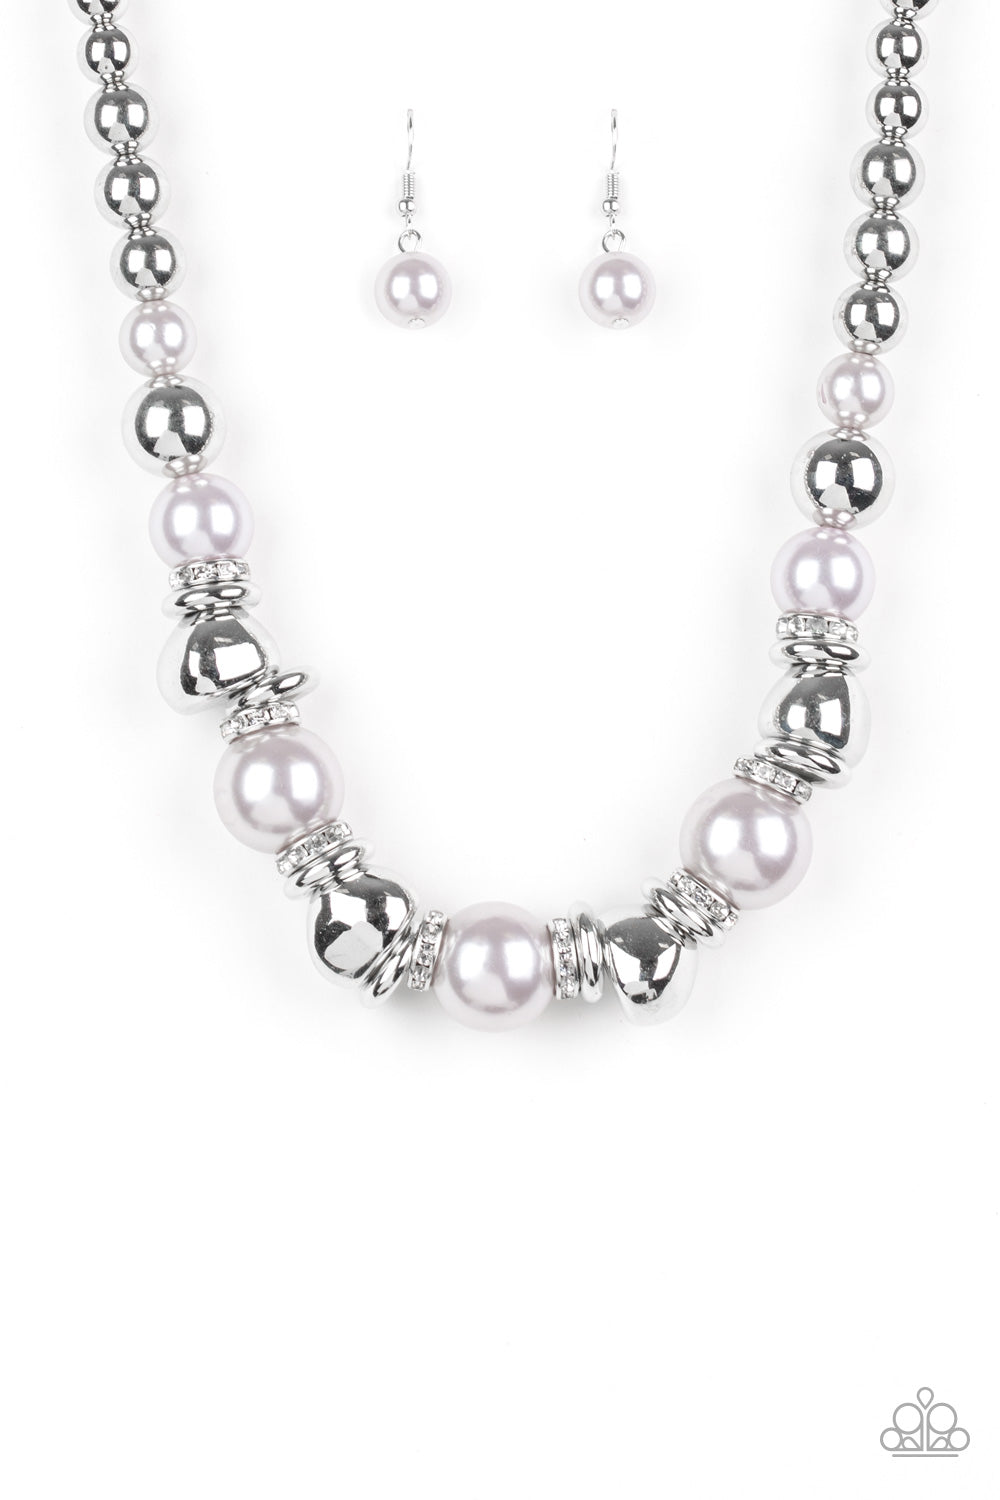 pittmanbling-and-jewelry-inc-presentshollywood-haute-spot-silver-necklace-paparazzi-accessories